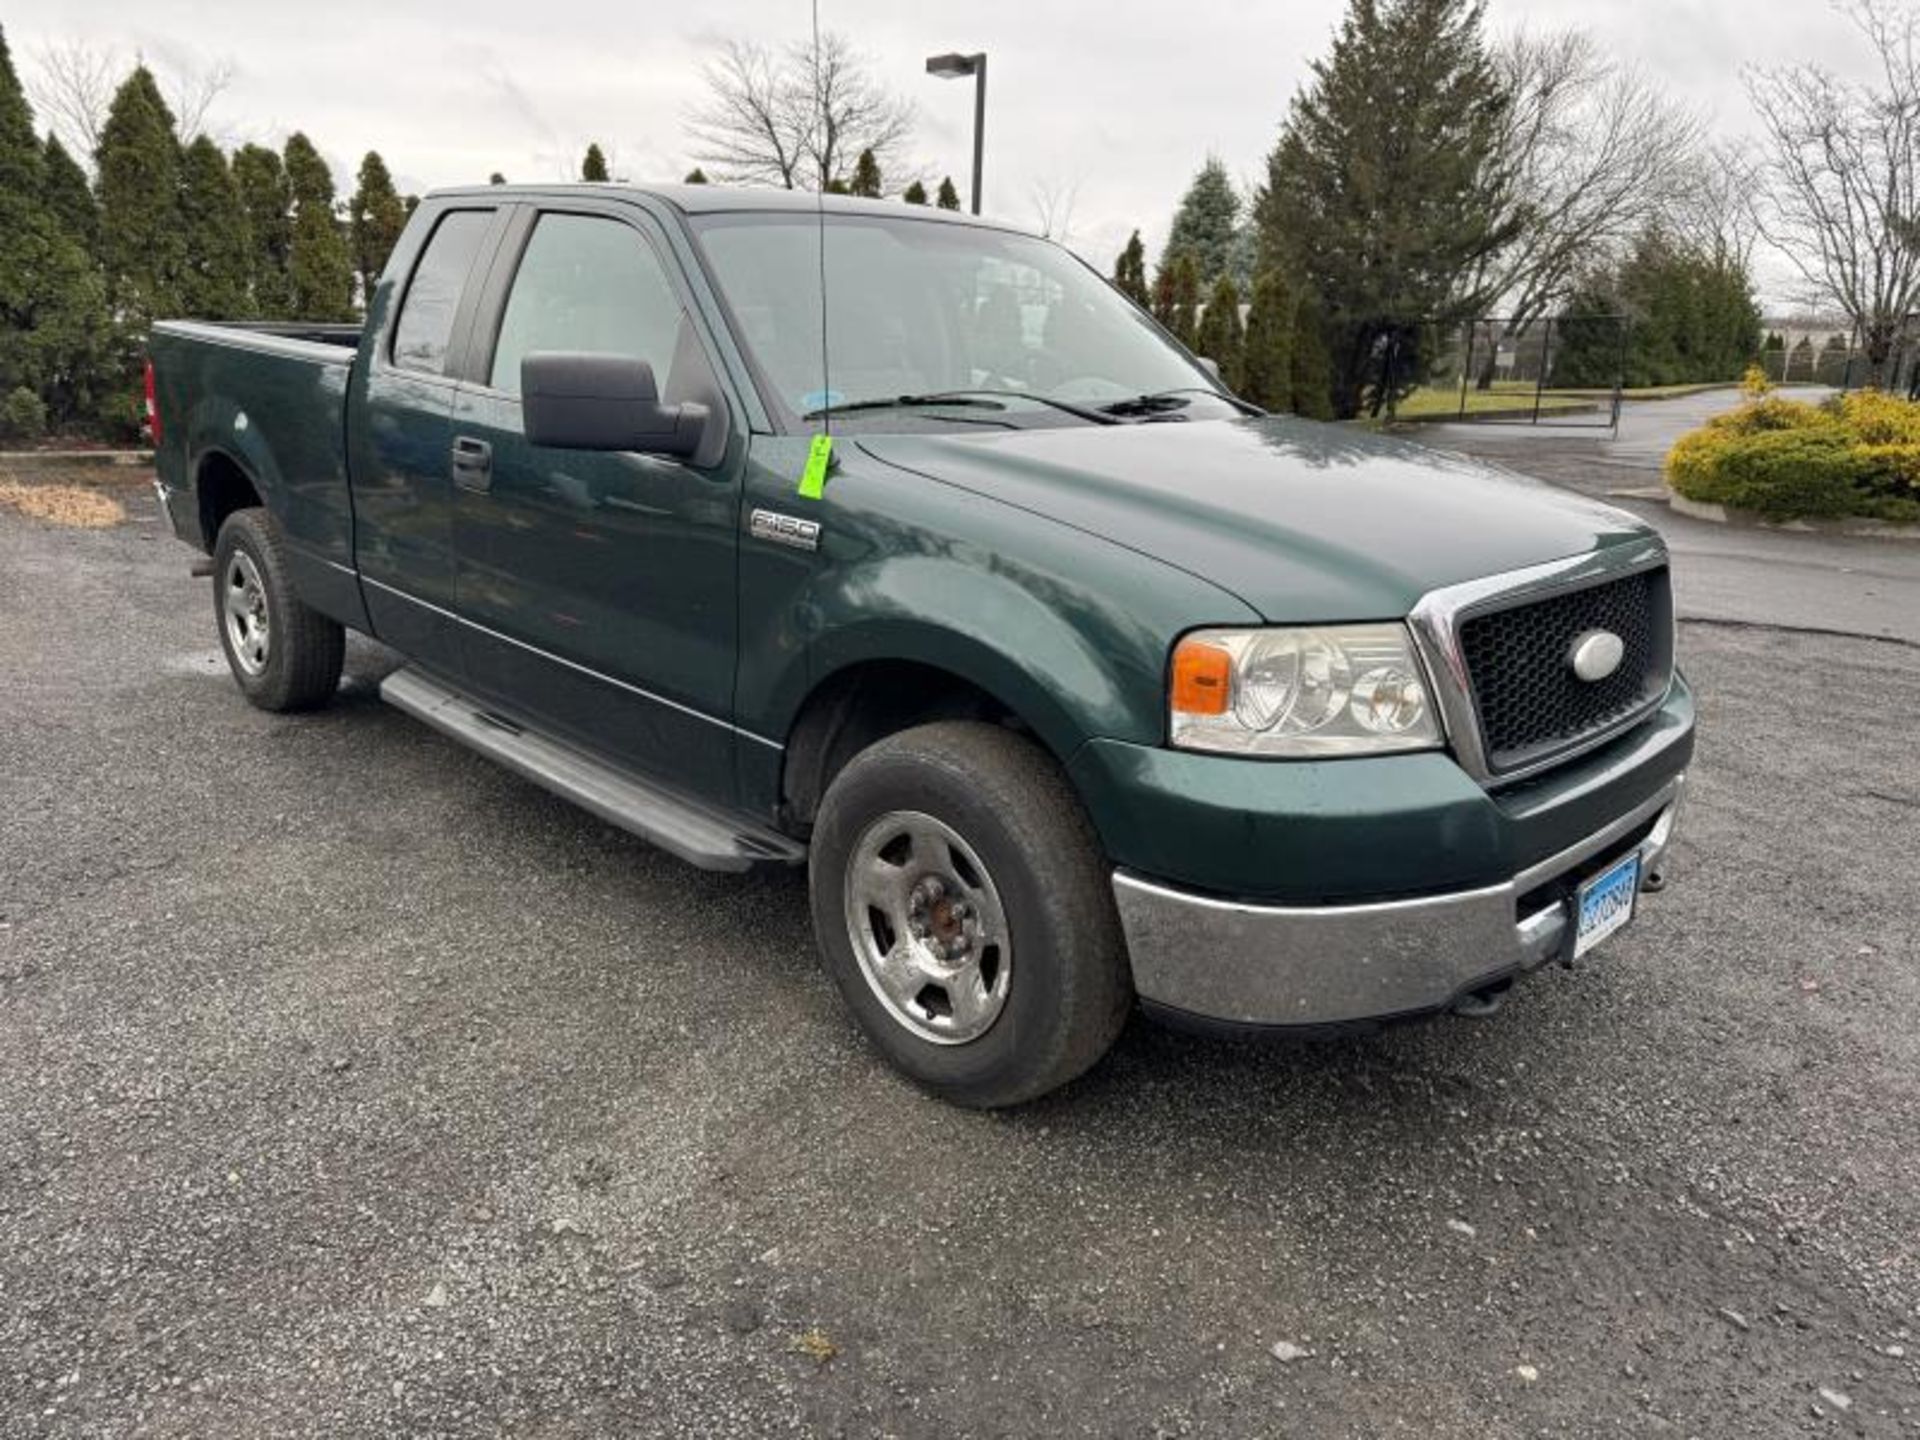 2007 Ford F-150 4x4 Pick Up Truck with 122,621 Mil 2007 Ford F-150 4x4 Pick Up Truck with 122,621 Mi - Image 10 of 11